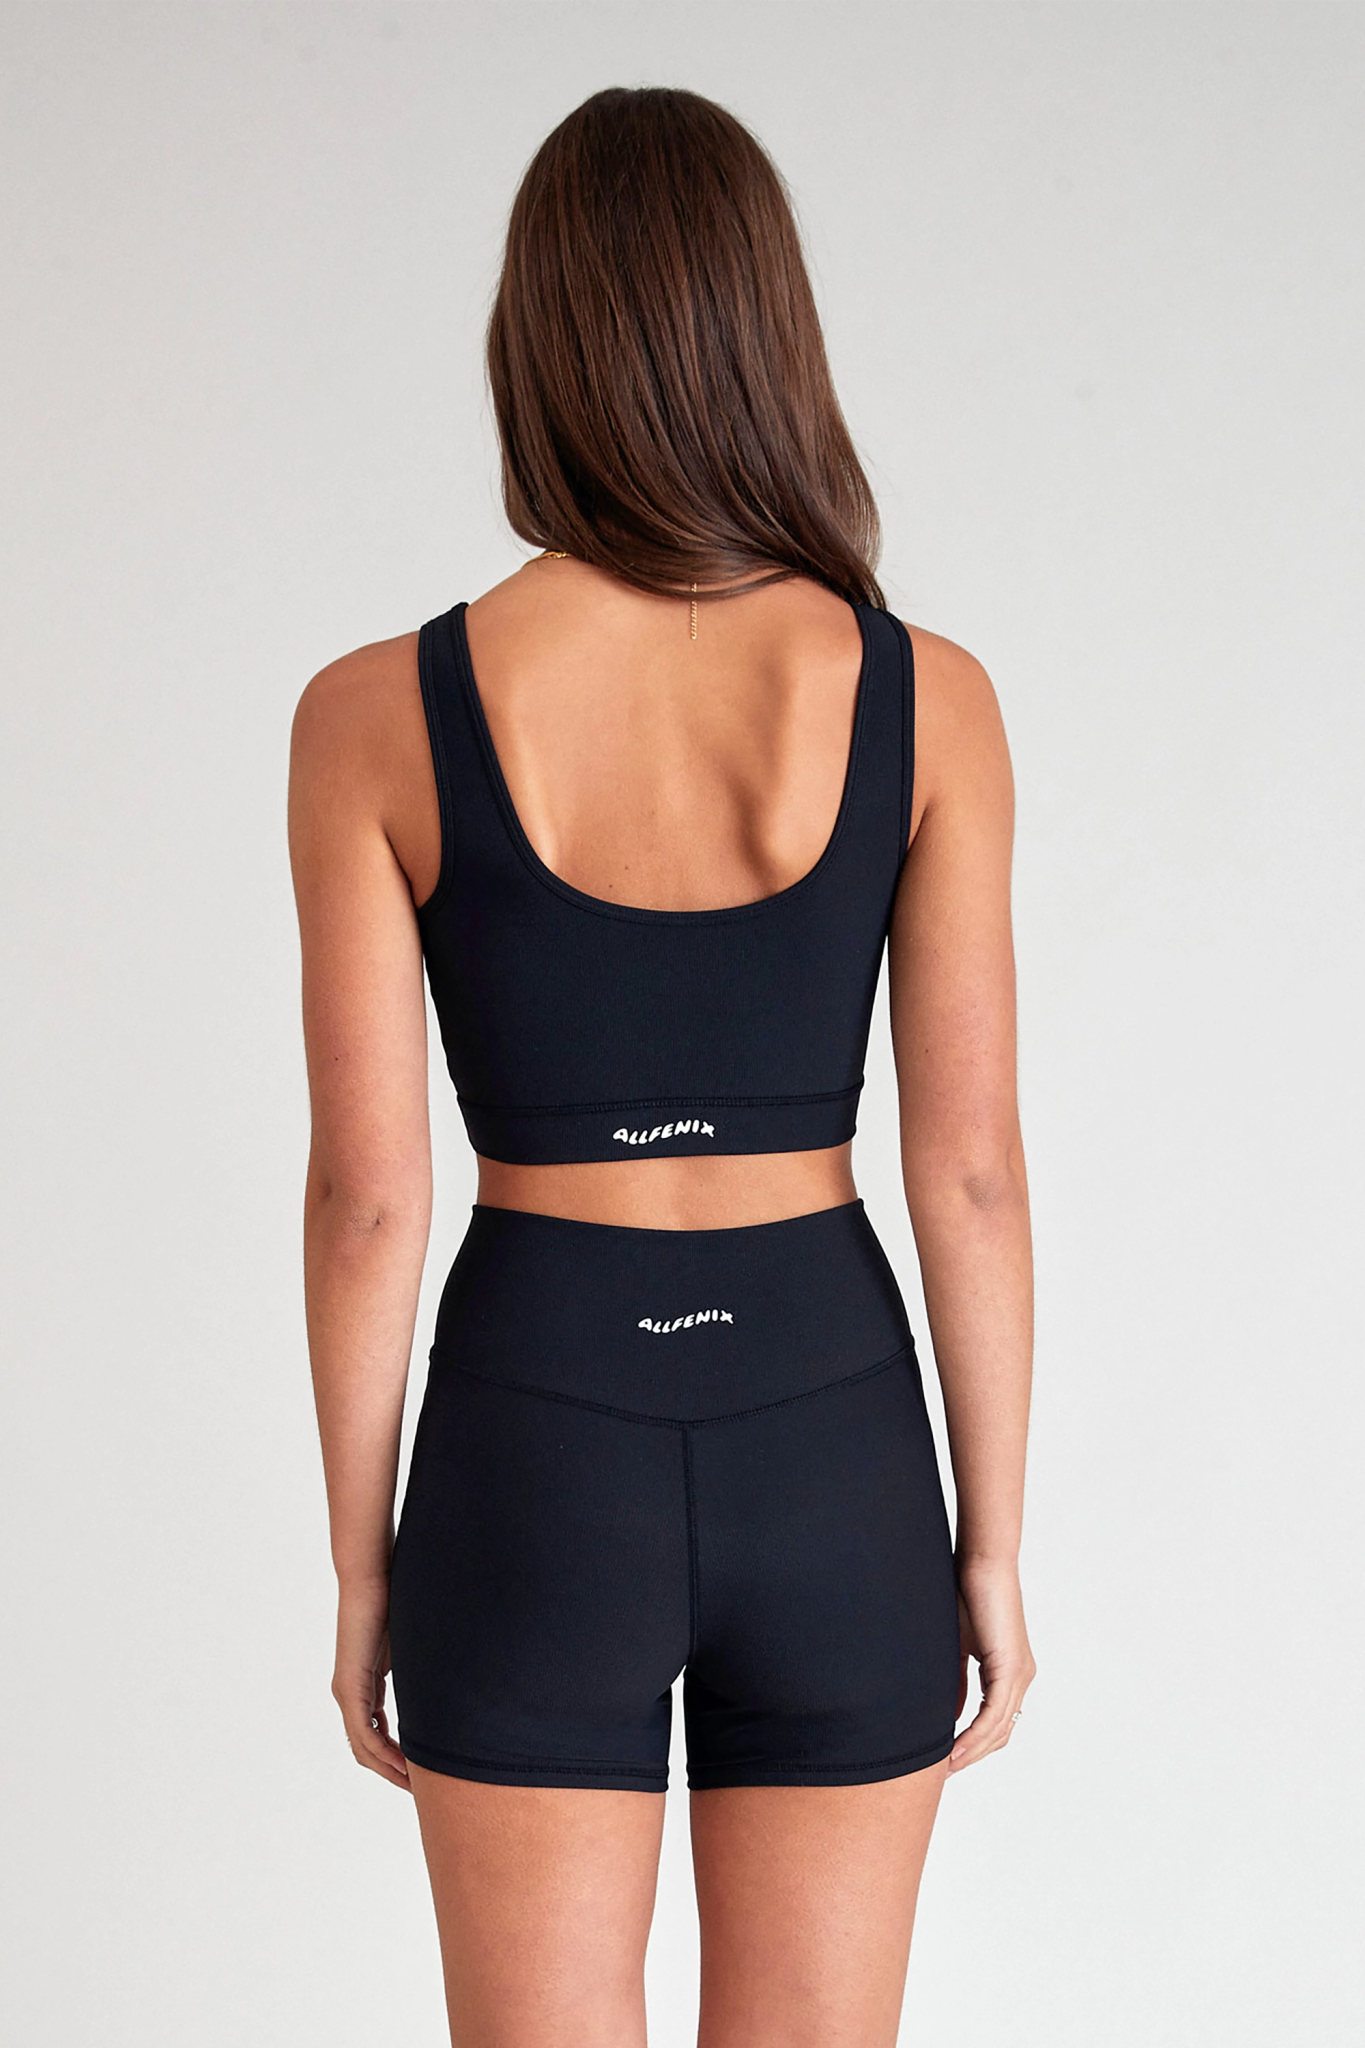 Shop the Latest Activewear Collections at All Fenix